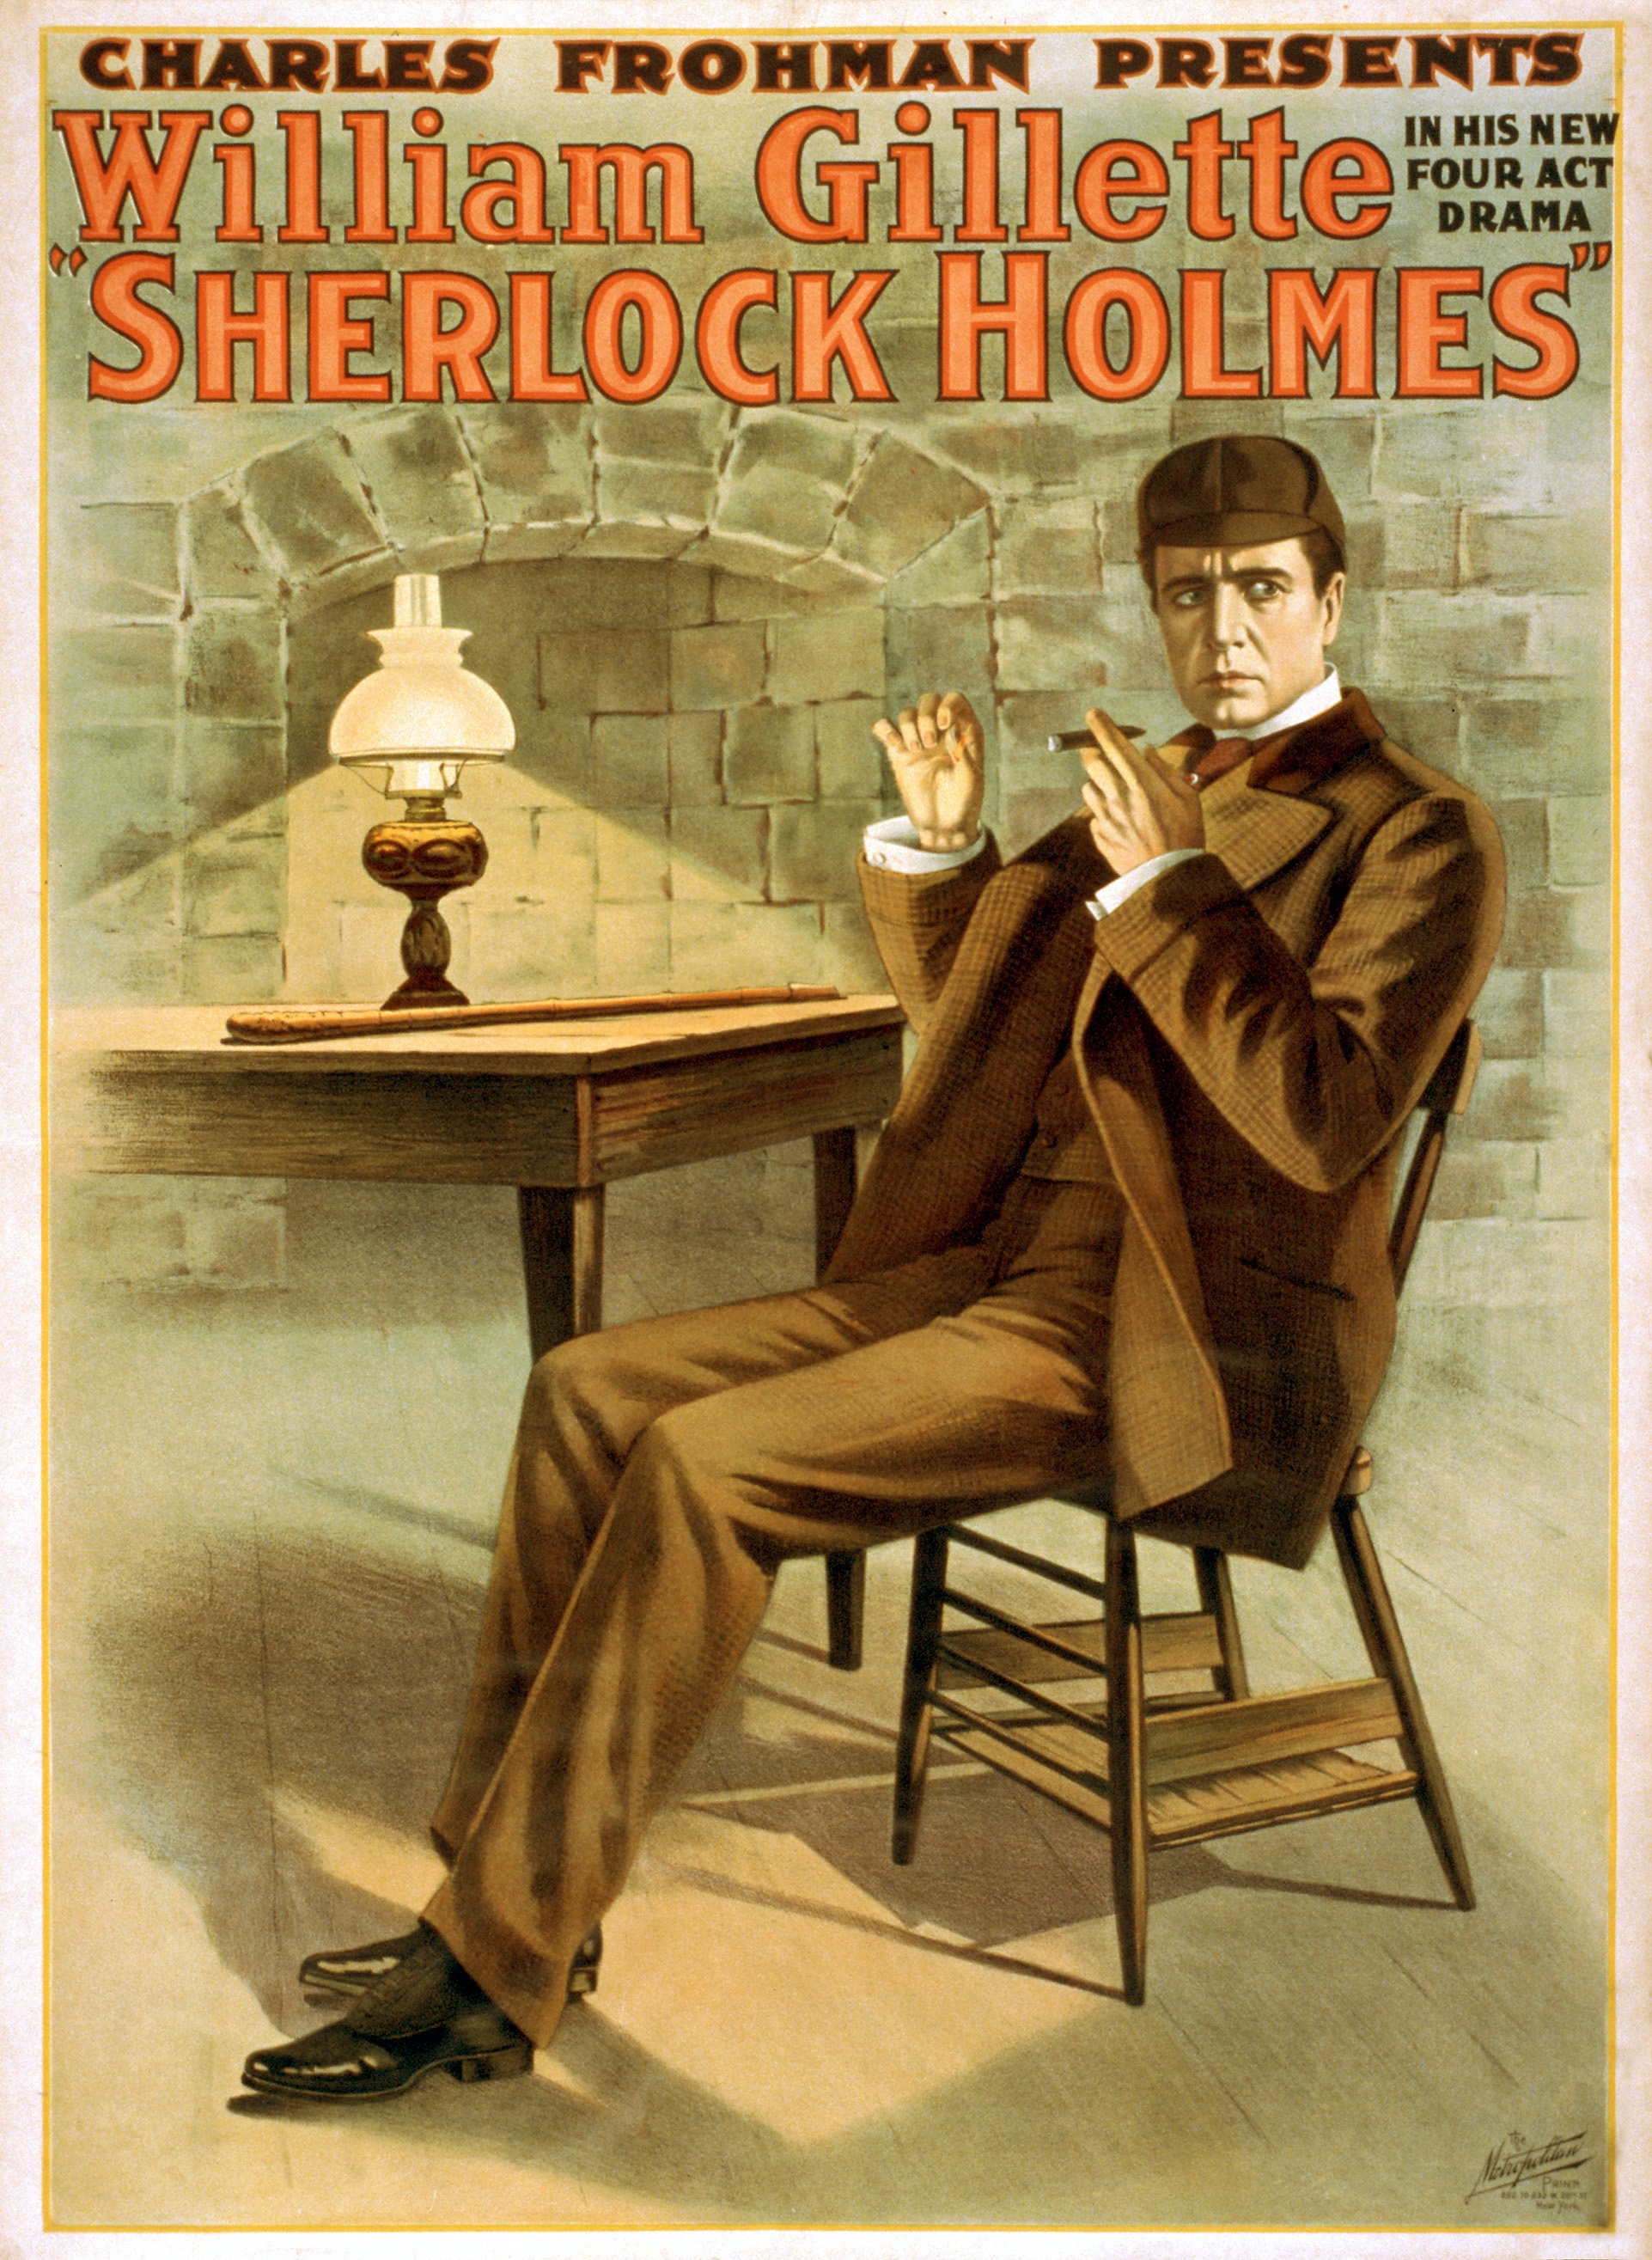 Sherlock Holmes Charles Frohman William Gillette Theatre 12x8" Reprint Poster